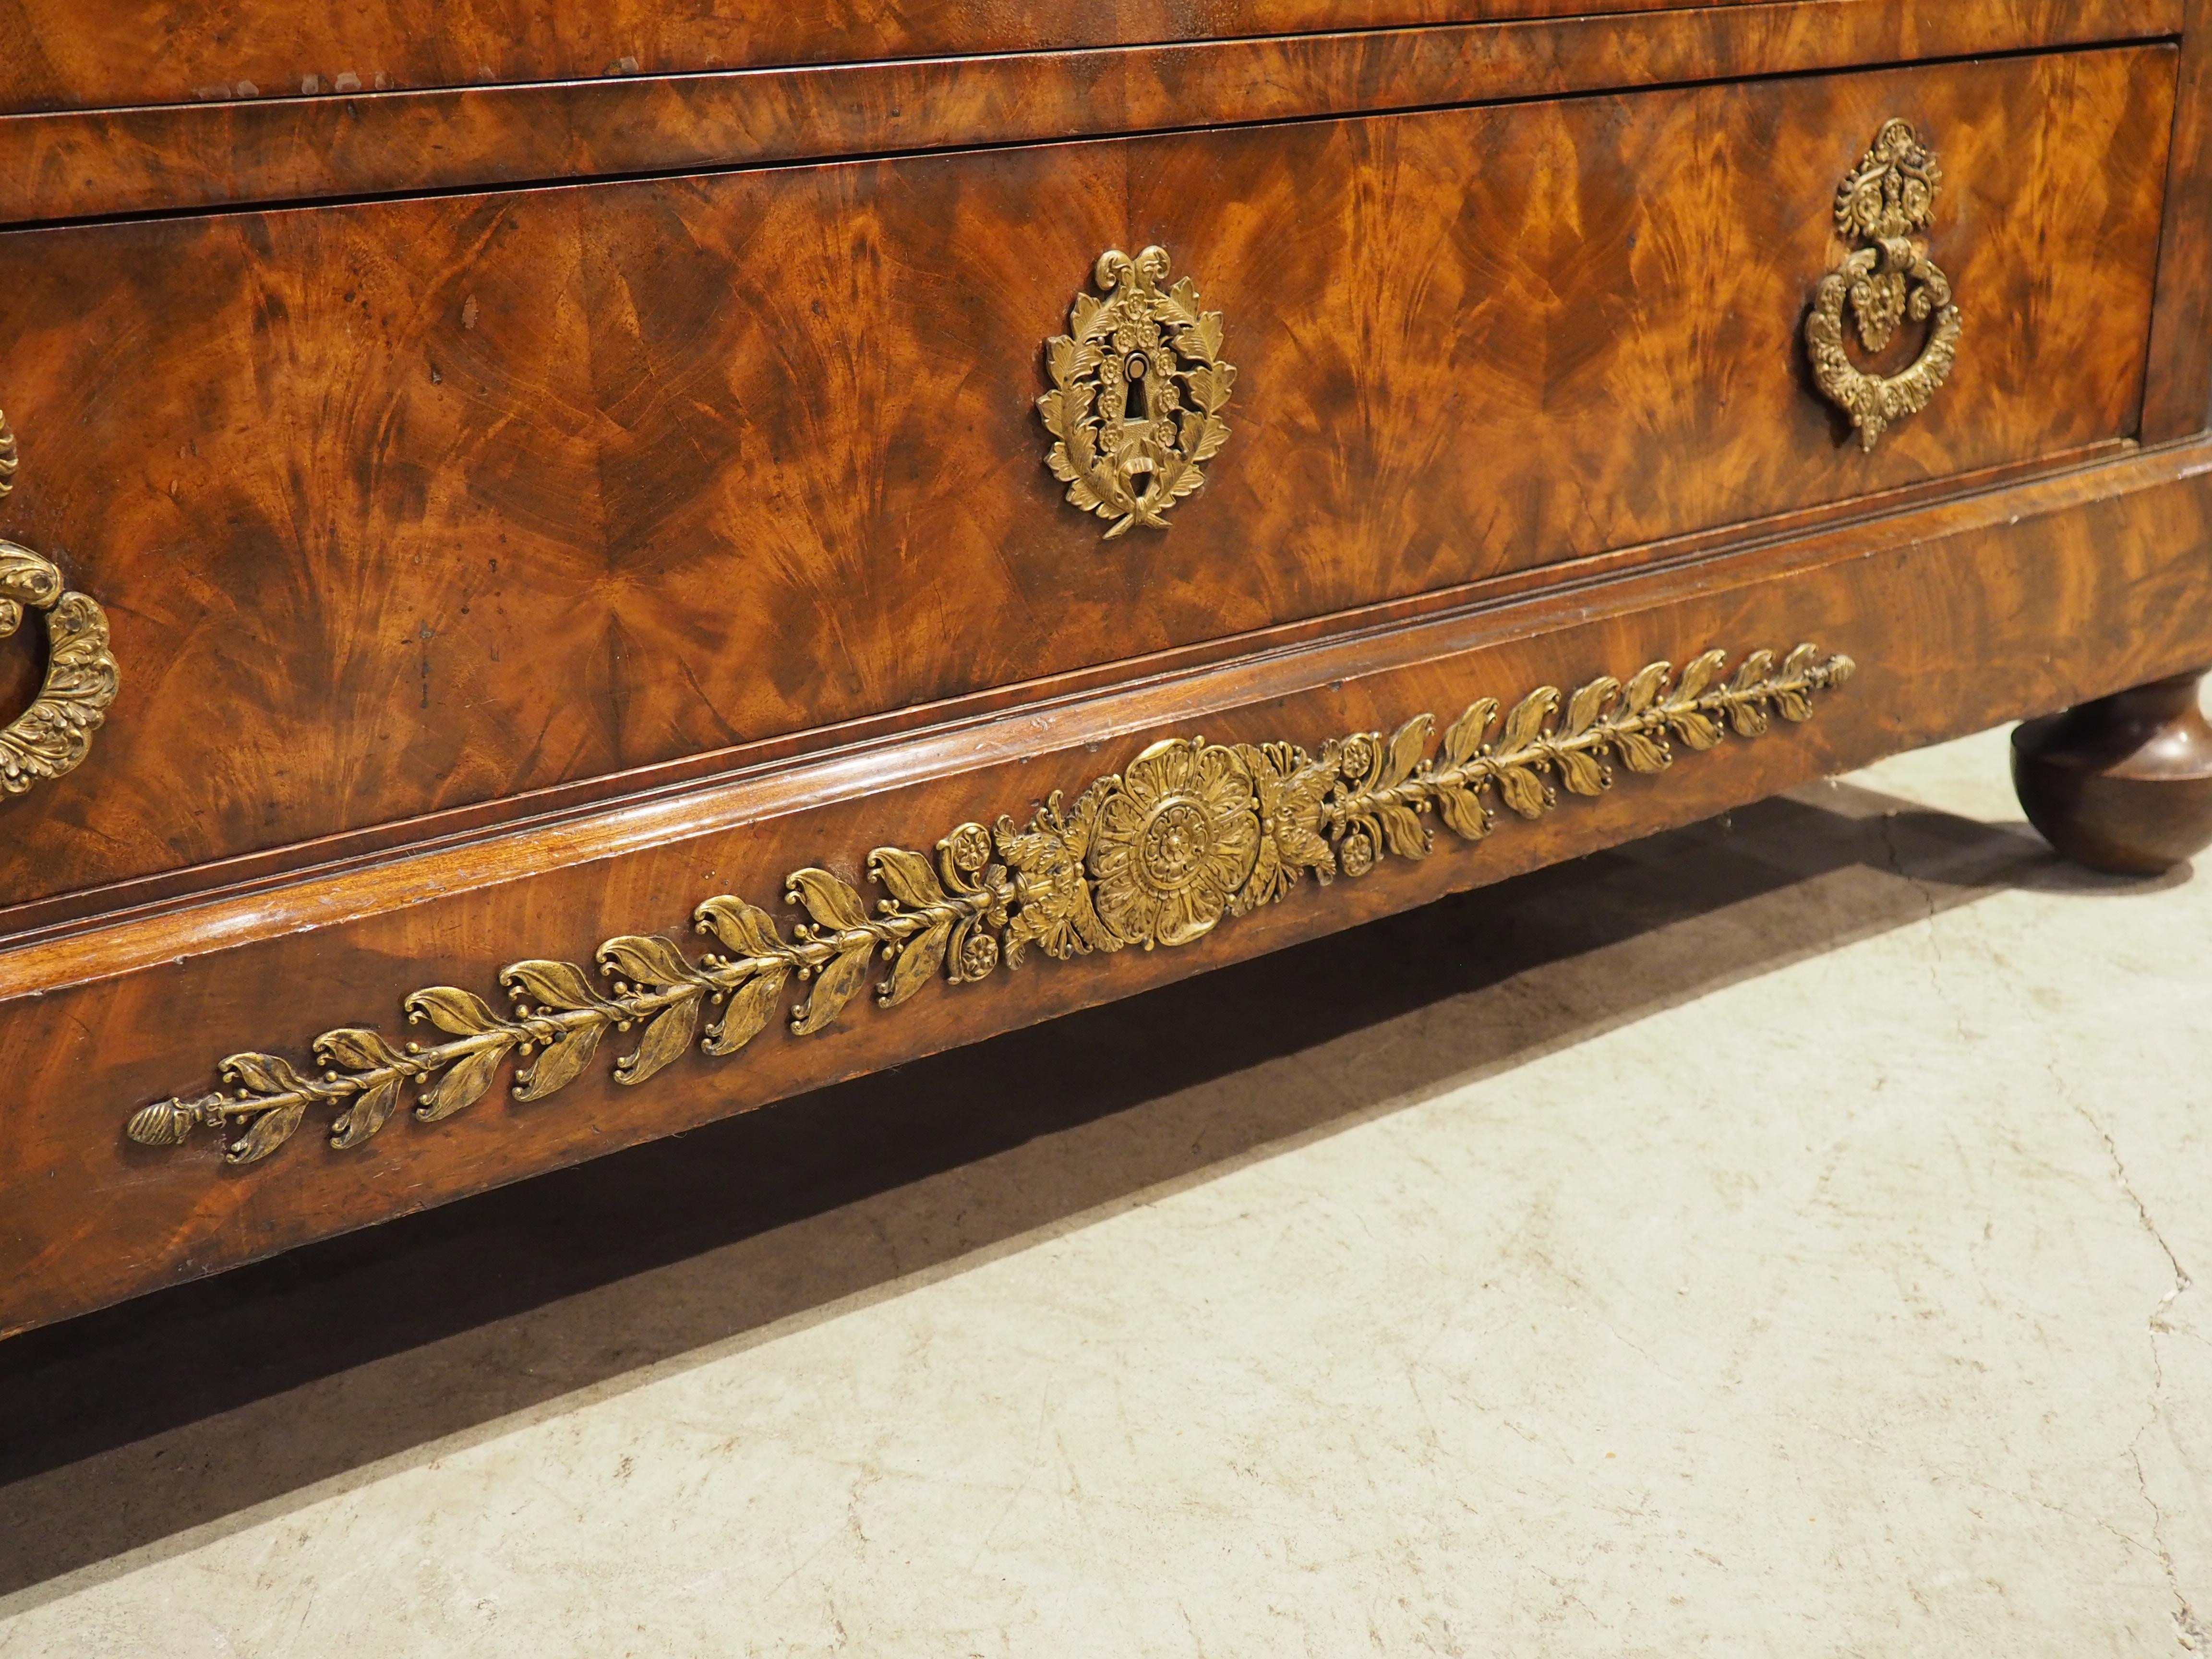 Circa 1820 French Restauration Commode in Flame Mahogany, Gilt Bronze Hardware For Sale 10